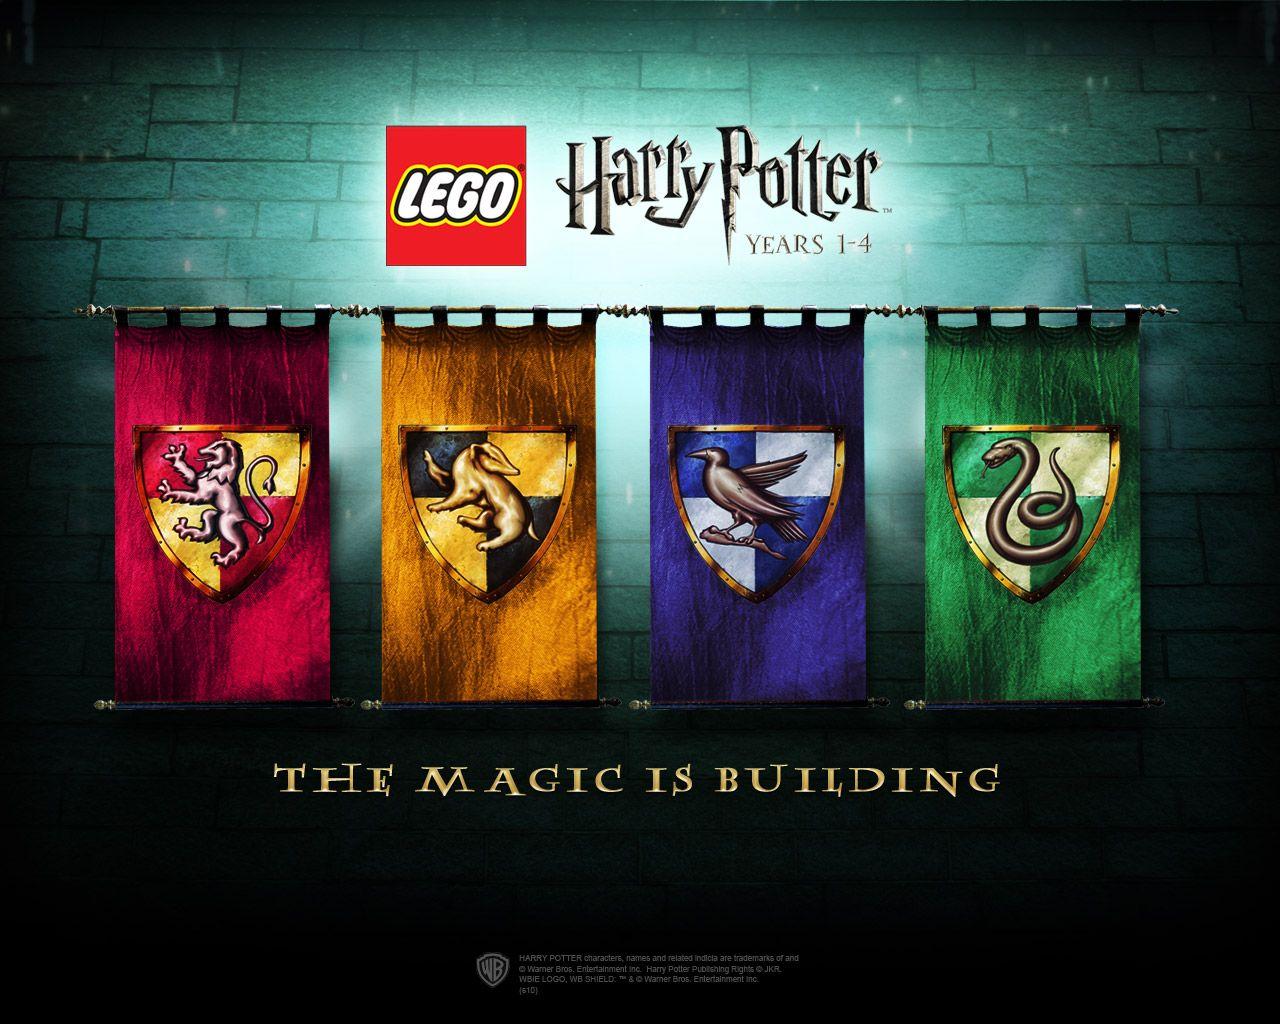 Lego Harry Potter Wallpapers Top Free Lego Harry Potter Backgrounds Wallpaperaccess